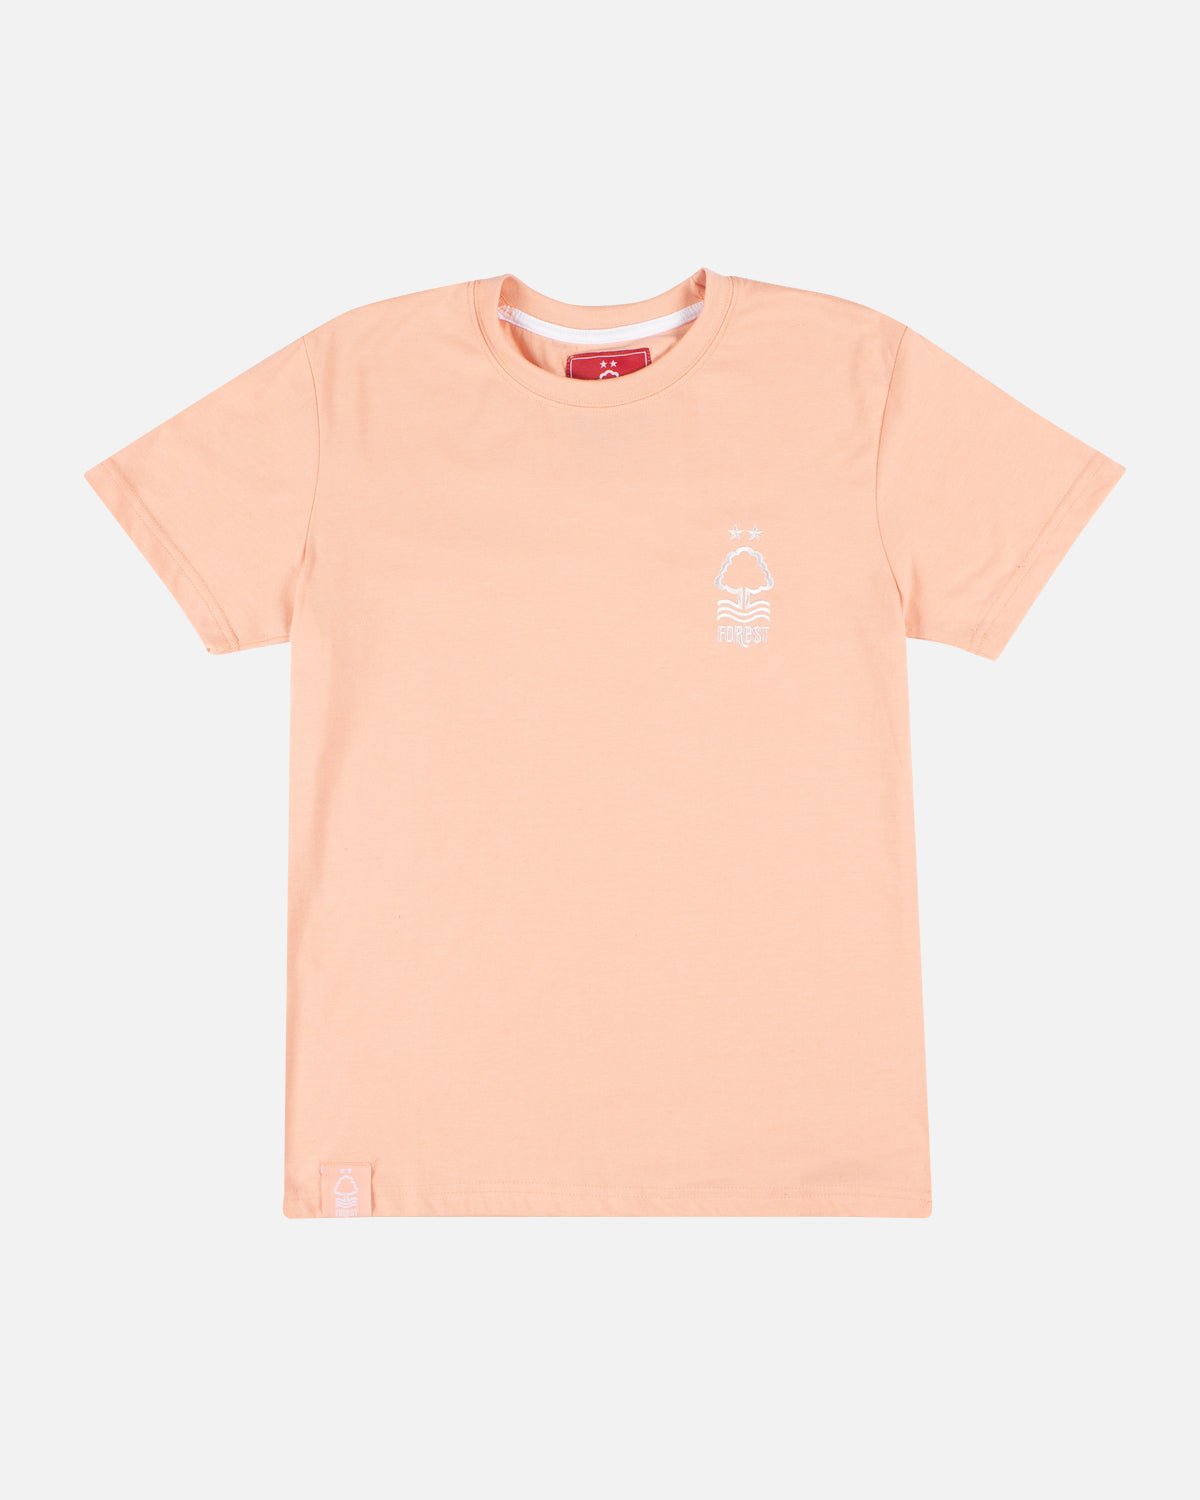 NFFC Womens Apricot T-Shirt - Nottingham Forest FC